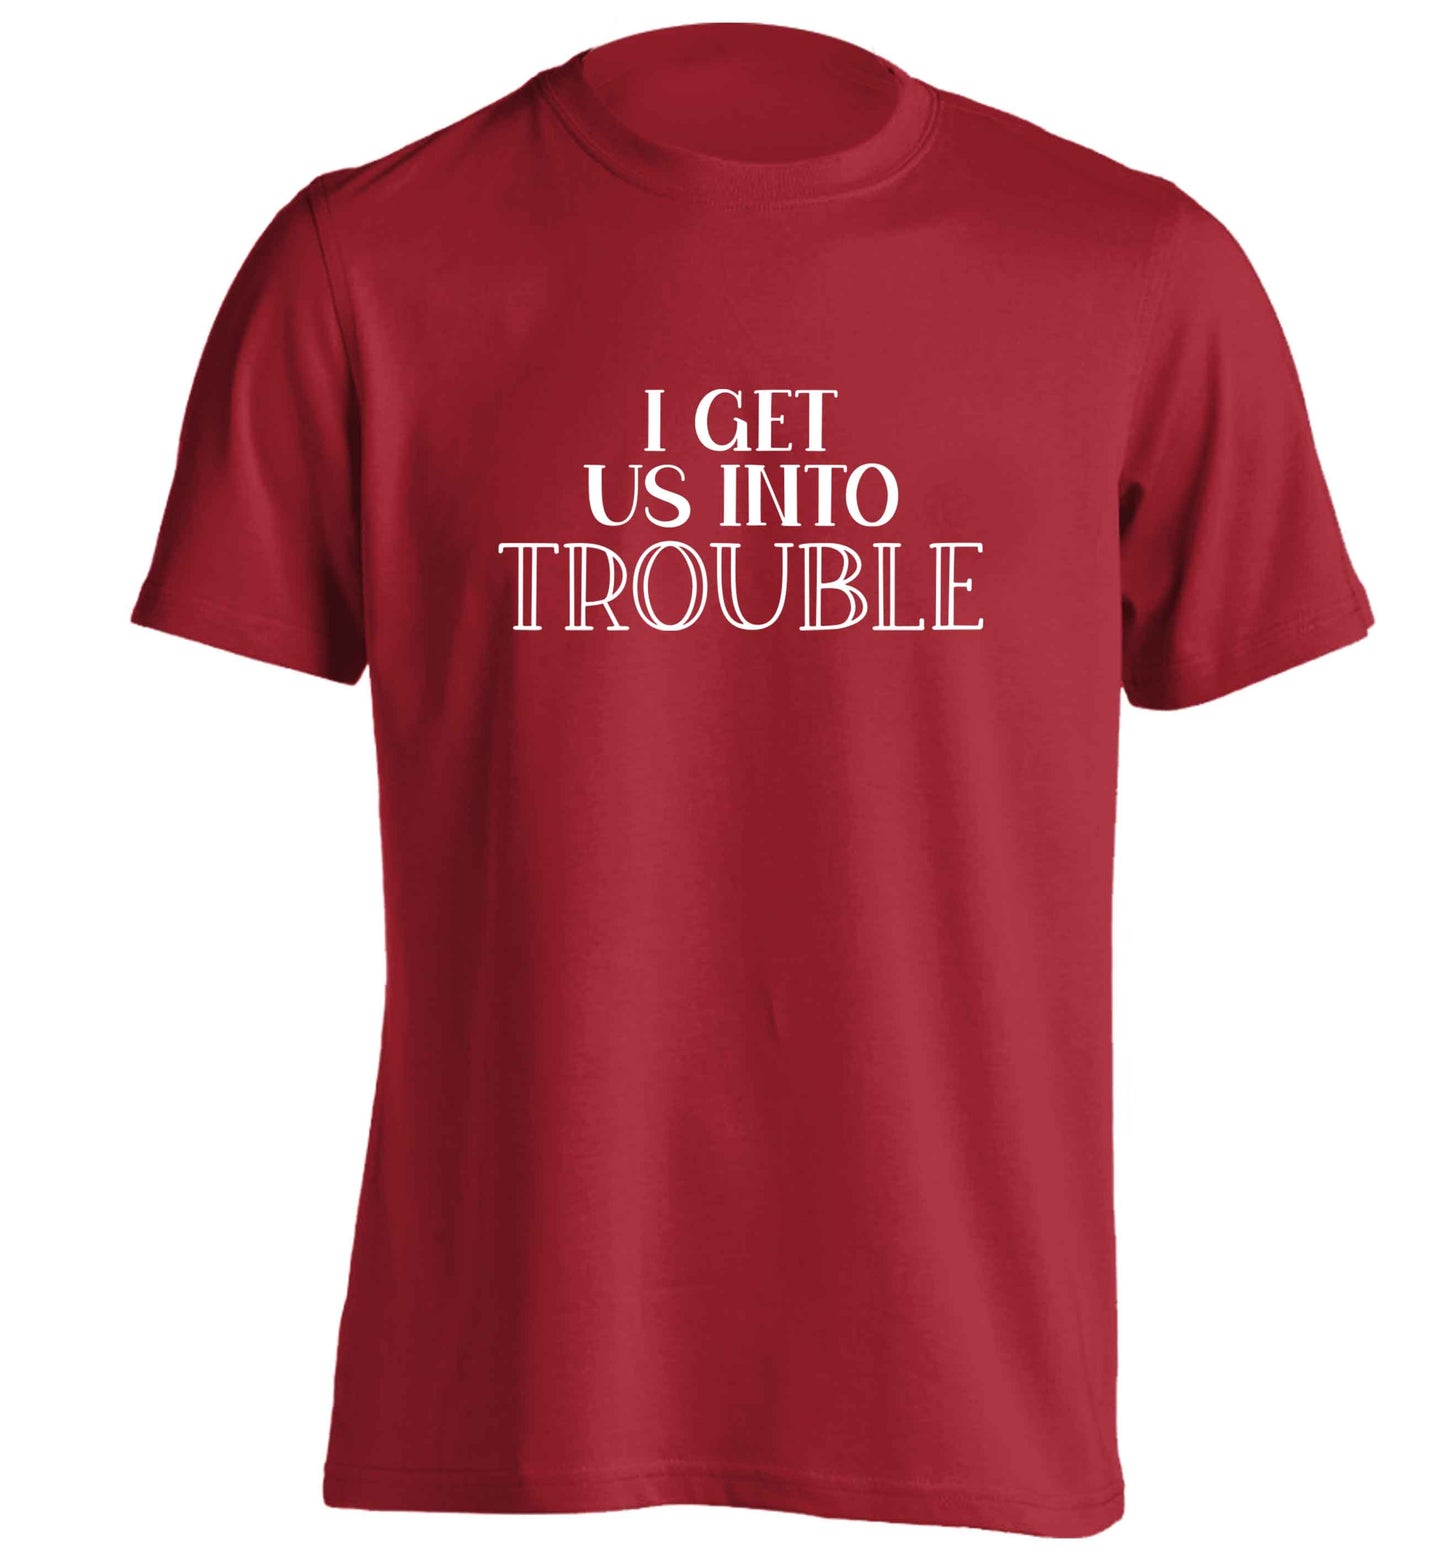 I get us into trouble adults unisex red Tshirt 2XL